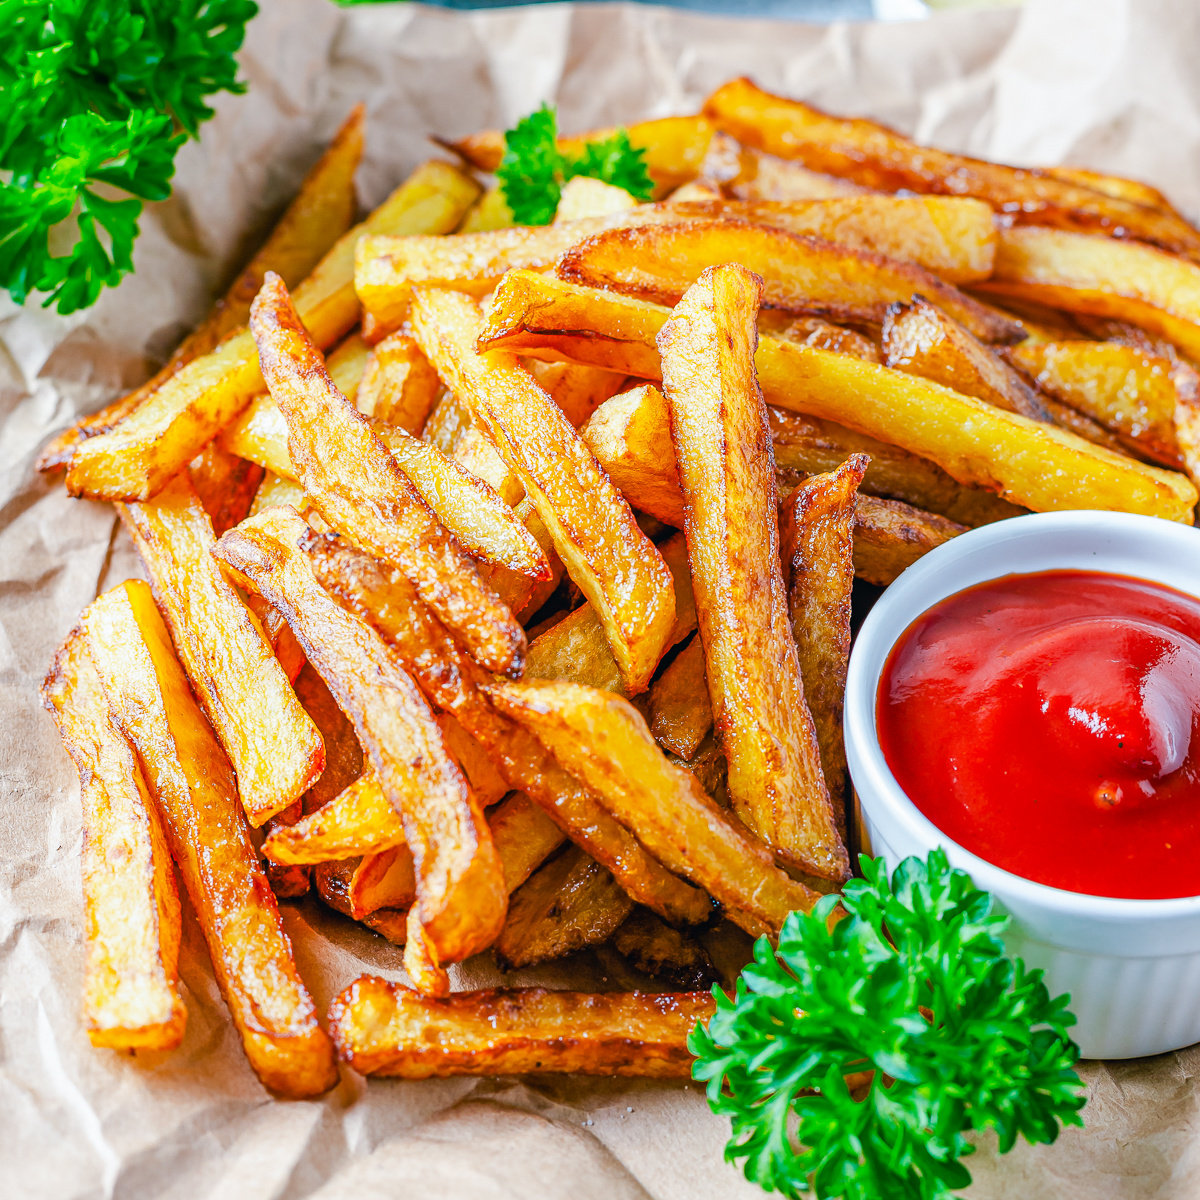 Homemade Double Fried French Fries